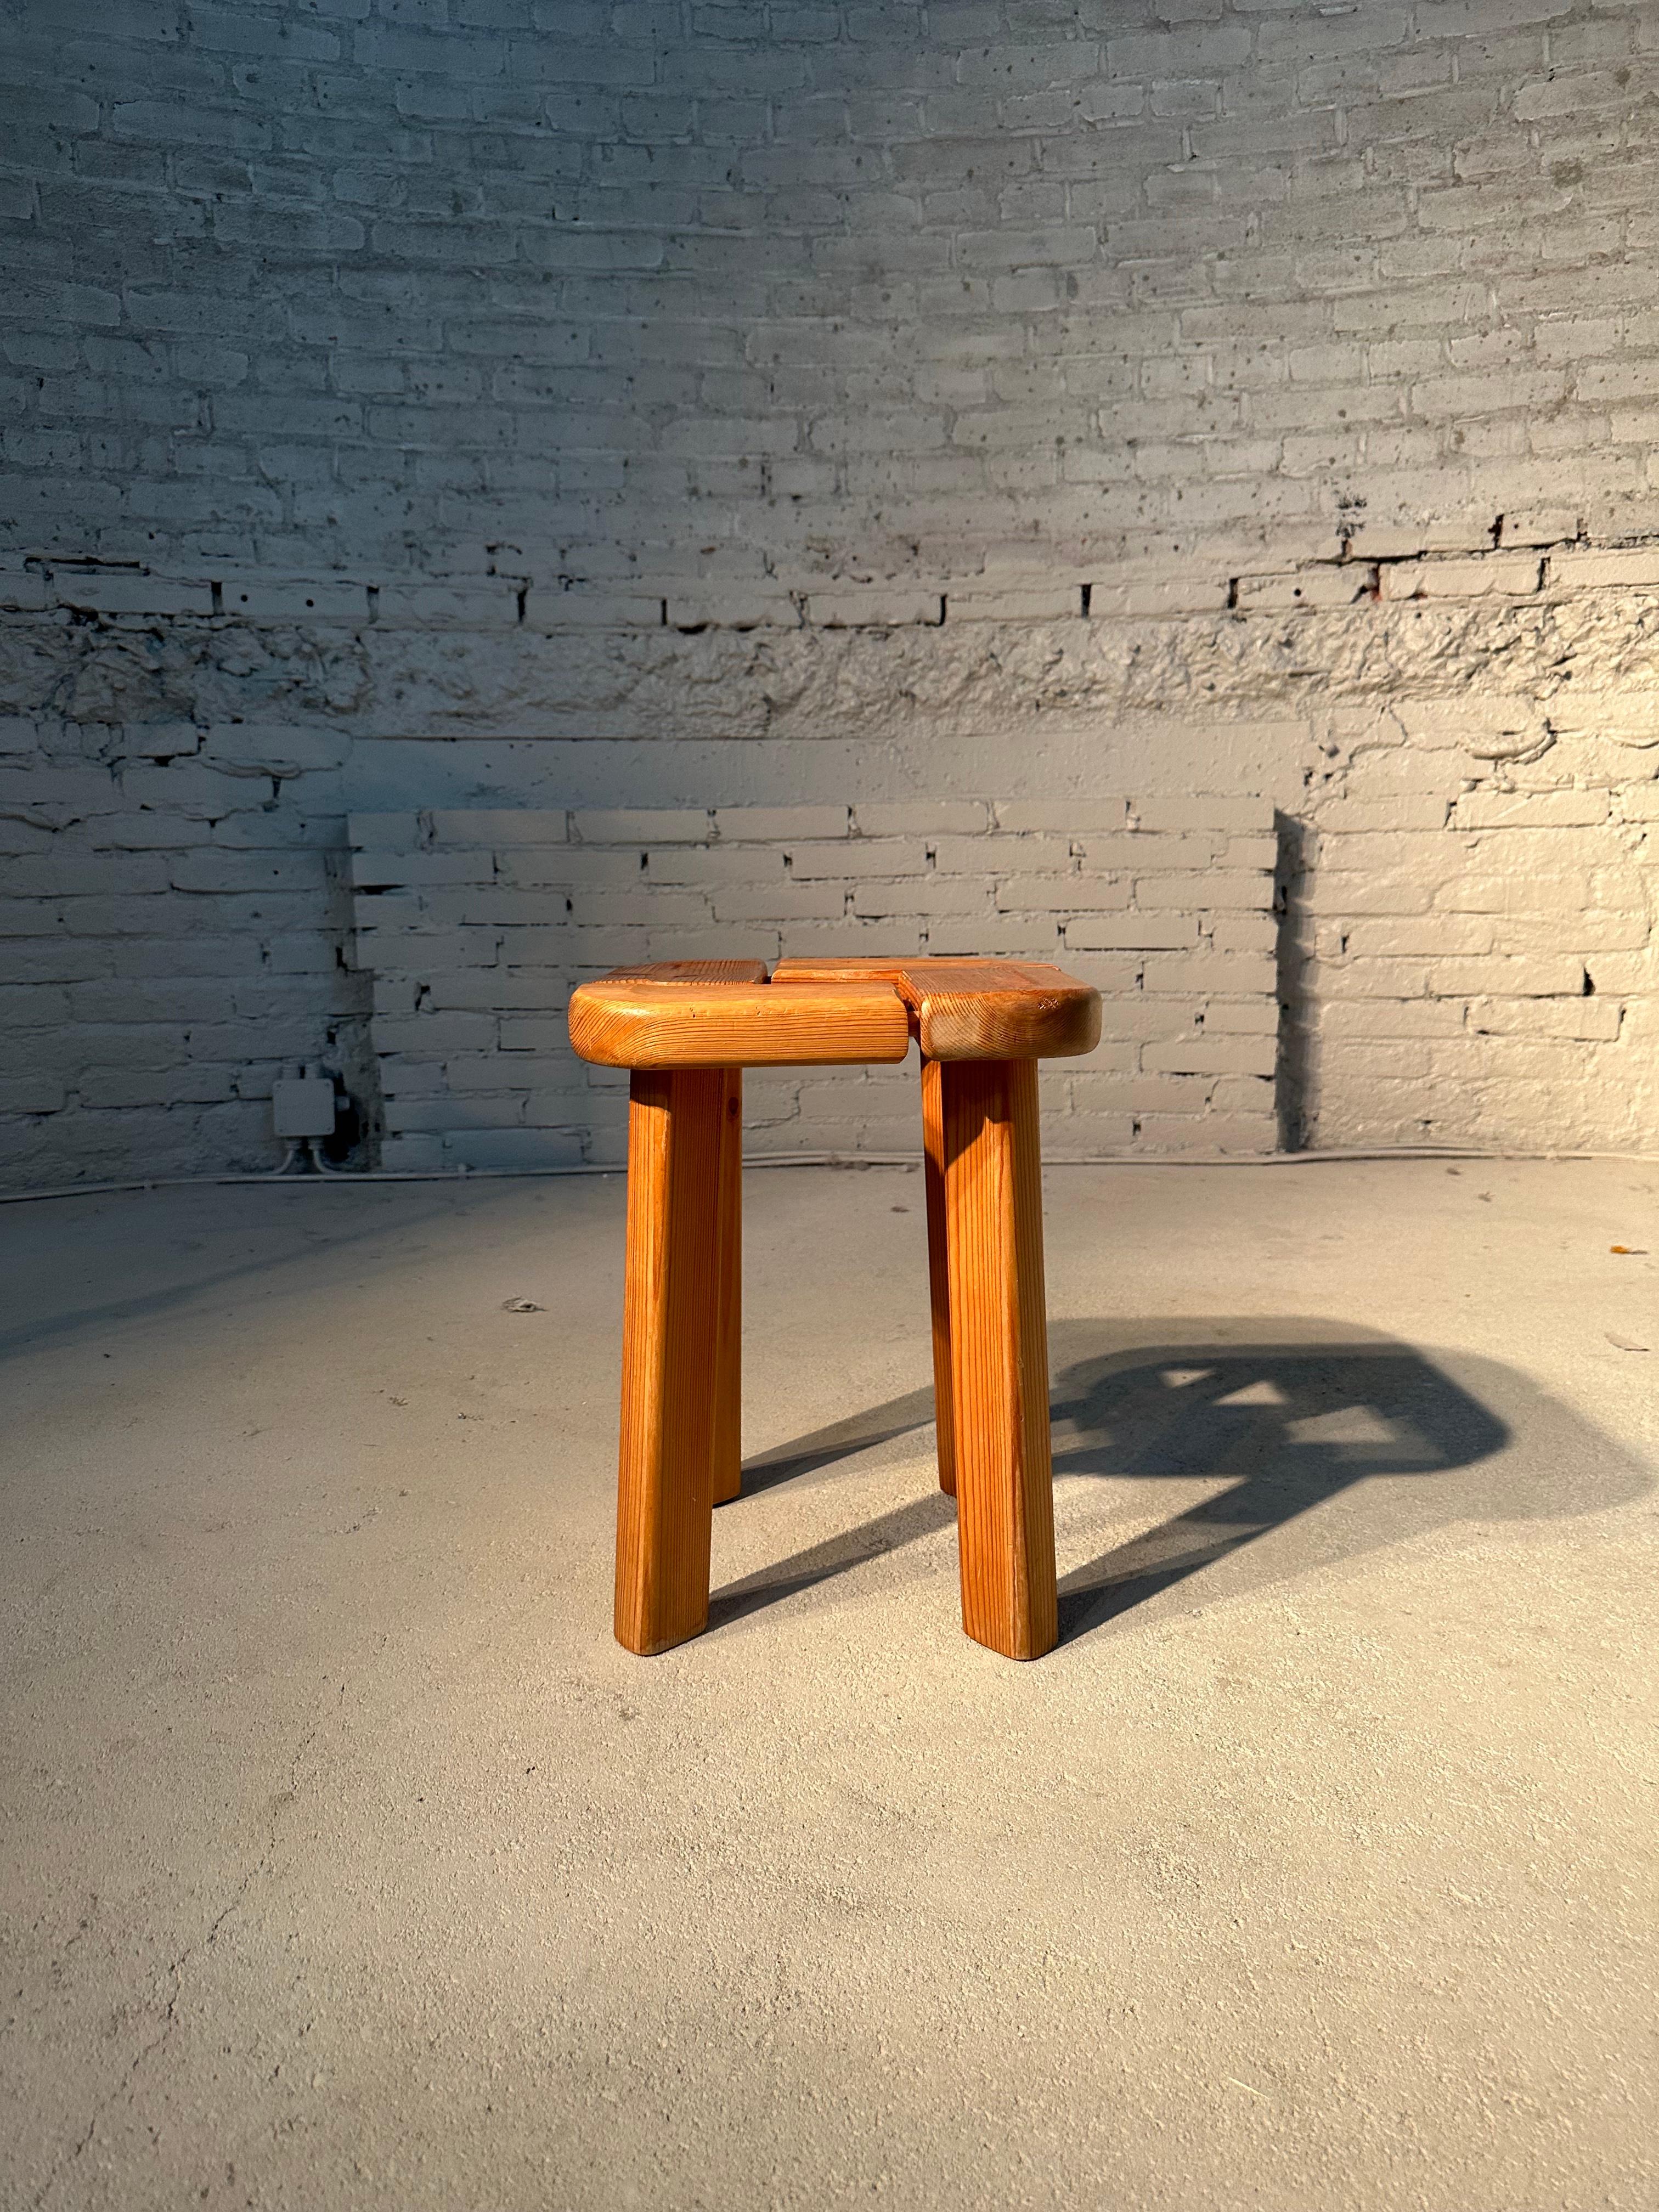 Sauna stools have been in use for centuries, predominantly in Japan and in Finland. While these pieces are mostly a utilitarian object, vintage sauna stools - like this one - from these countries are handmade, beautiful pieces.
Sauna stools are